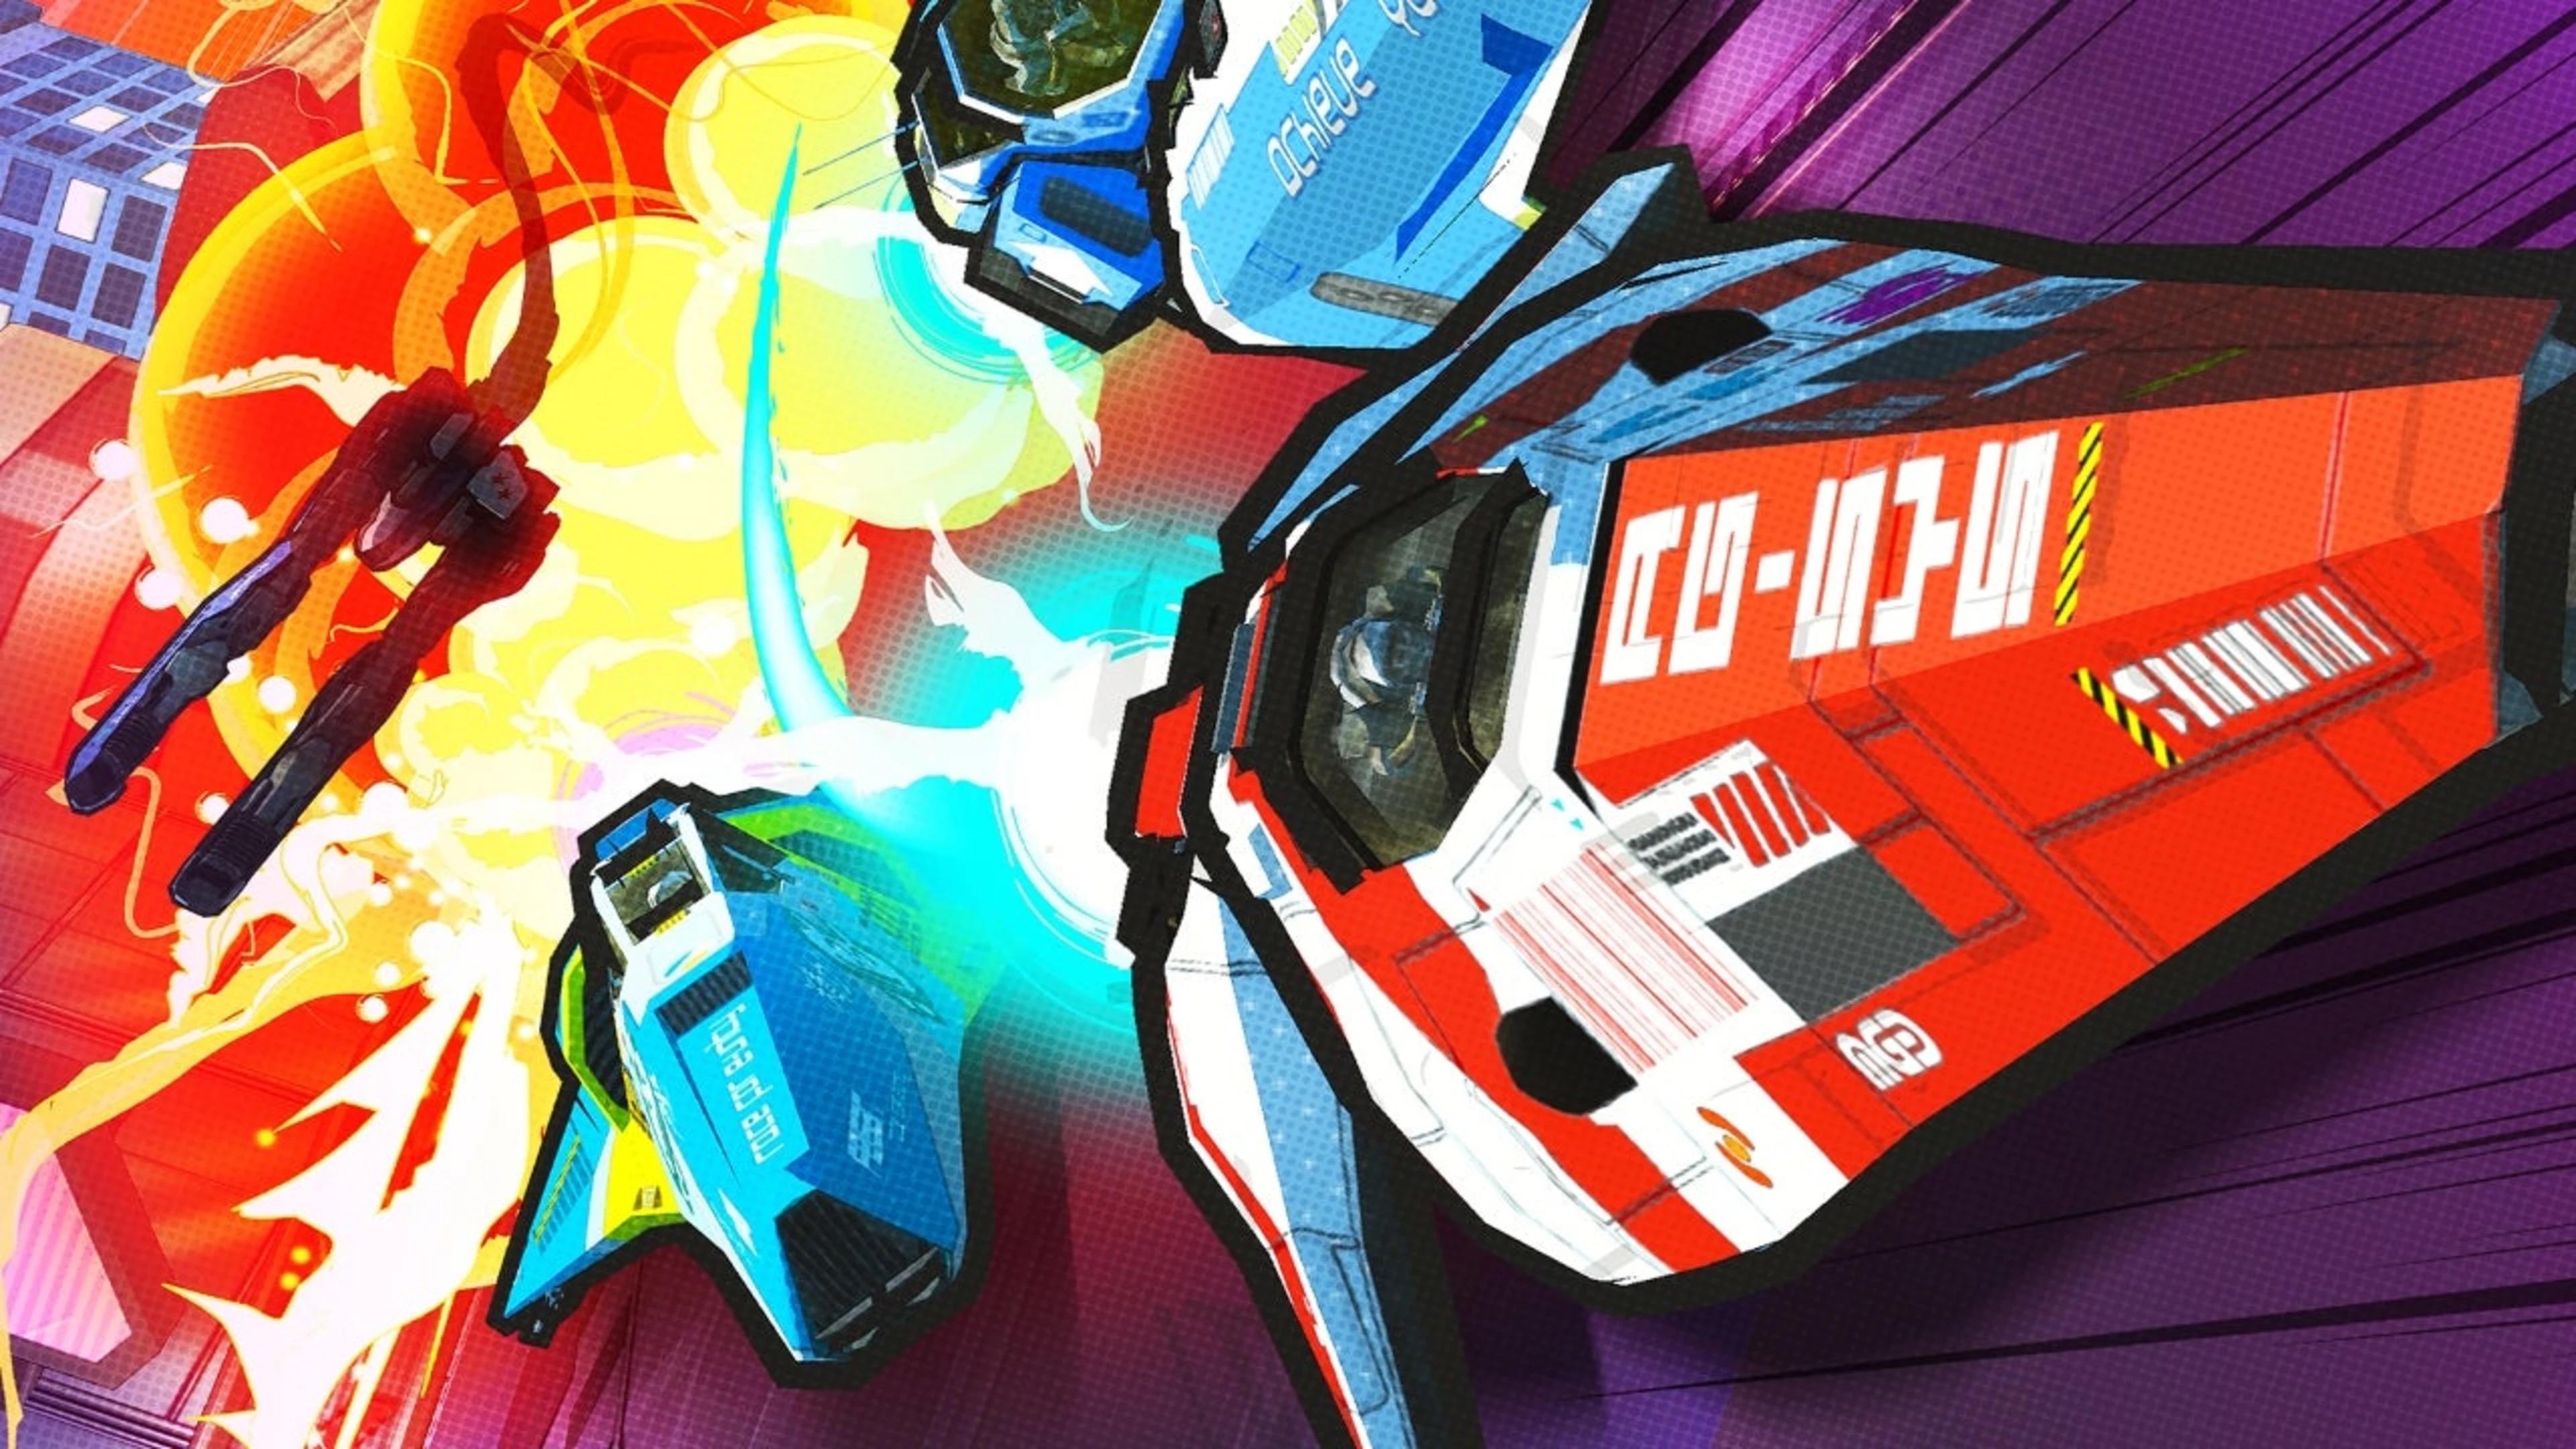 New Wipeout game is for mobile phones, not PlayStation